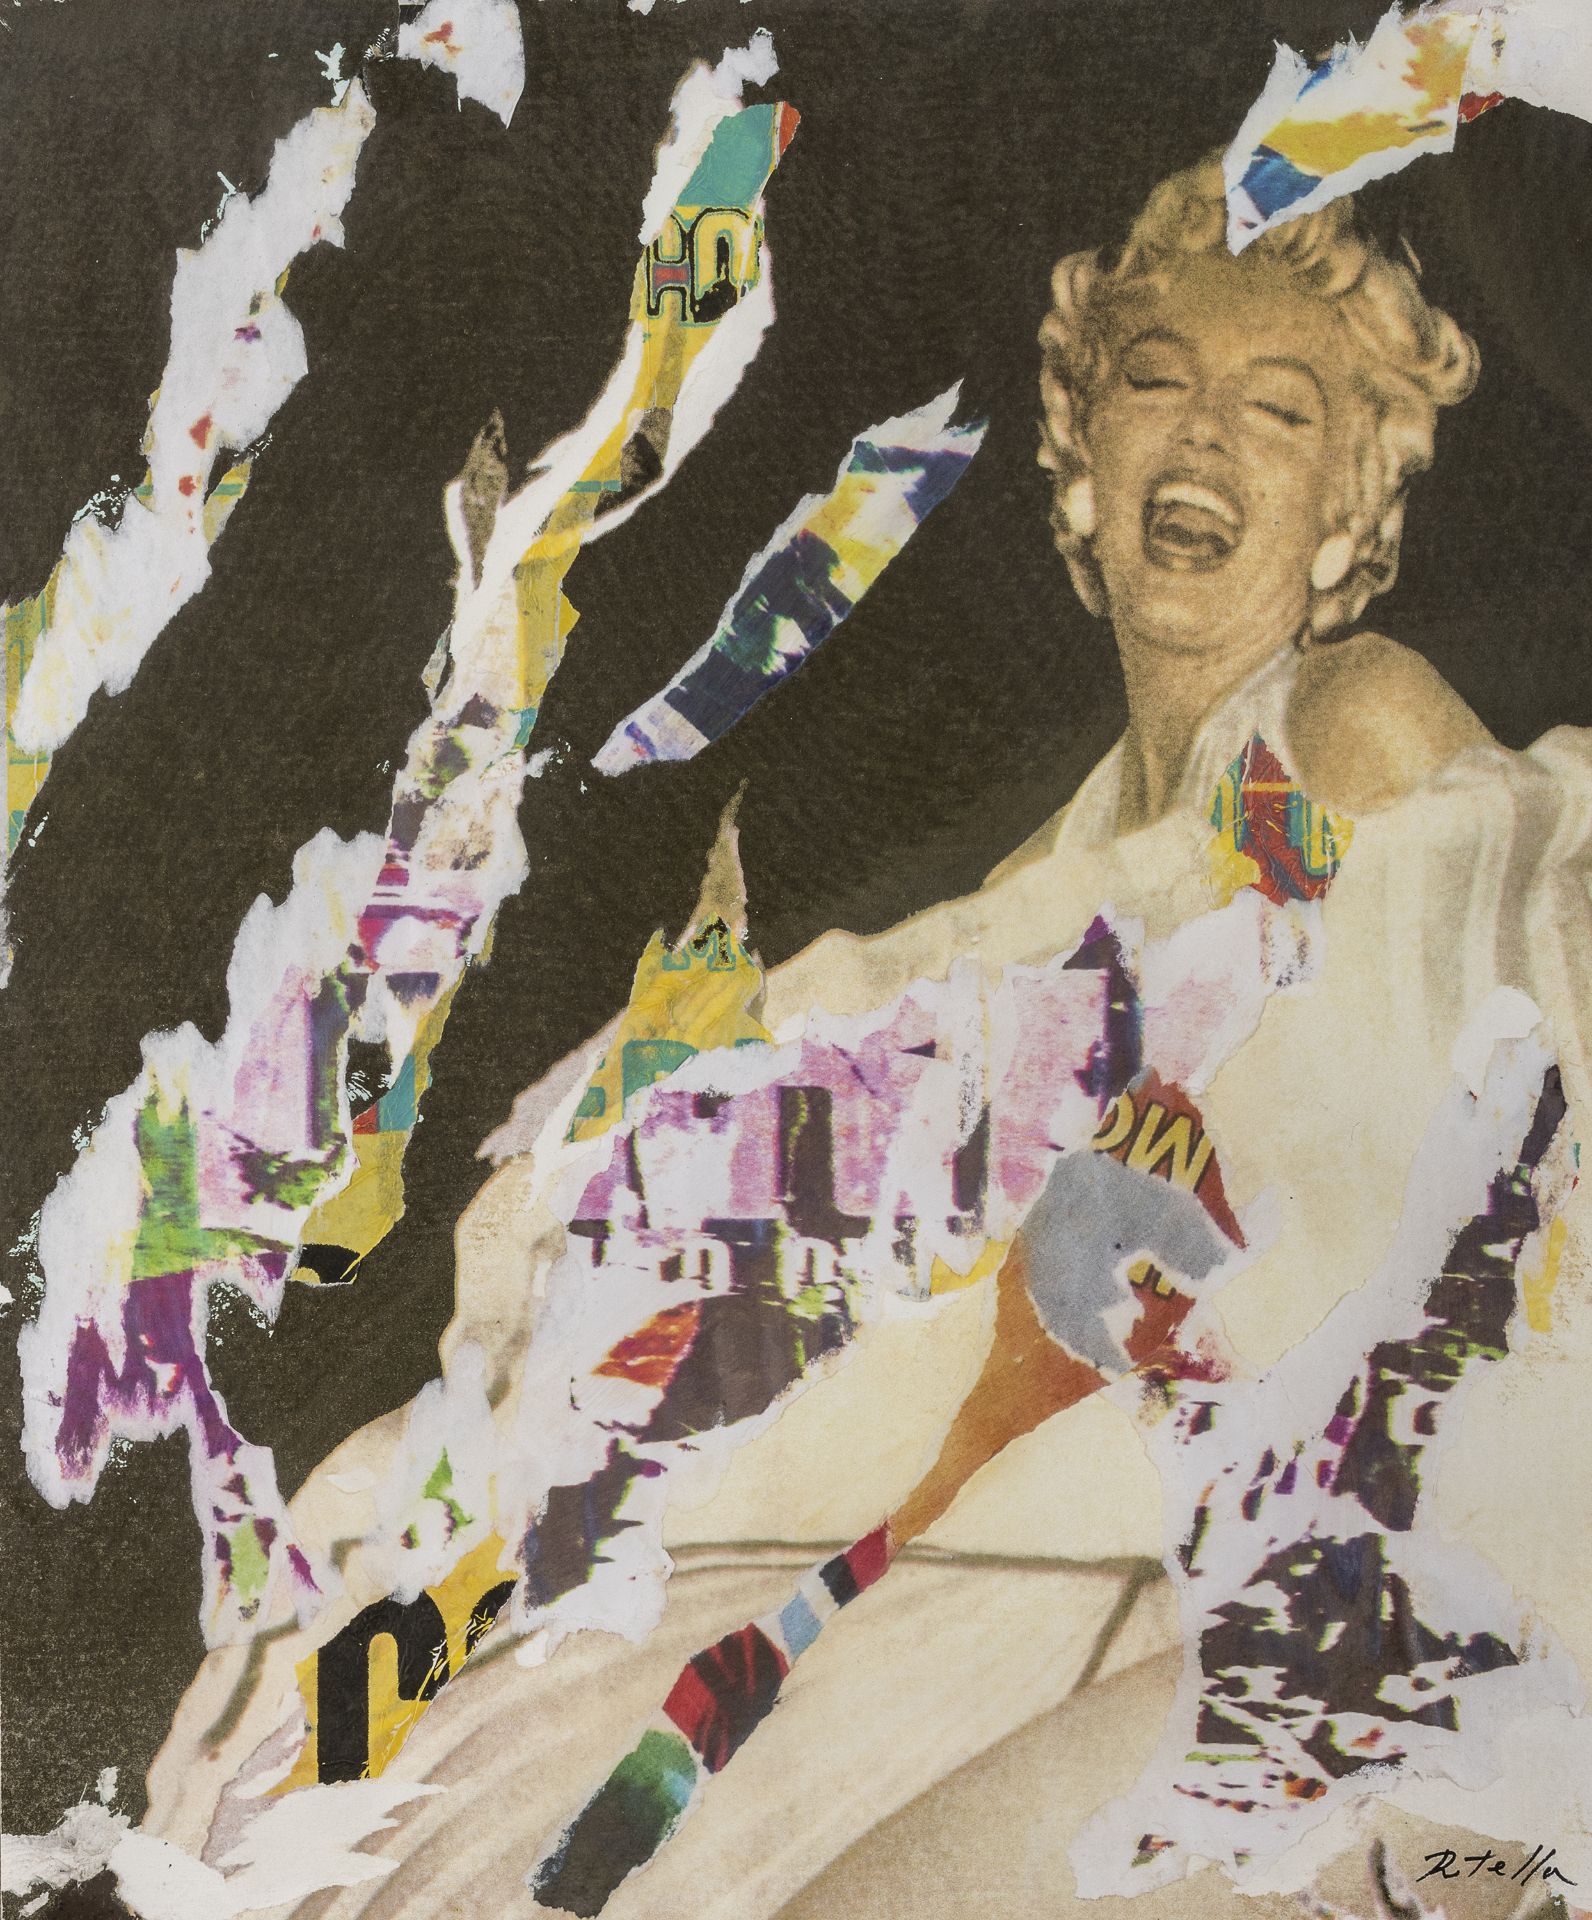 MARILYN MONOTYPE BY MIMMO ROTELLA 2003